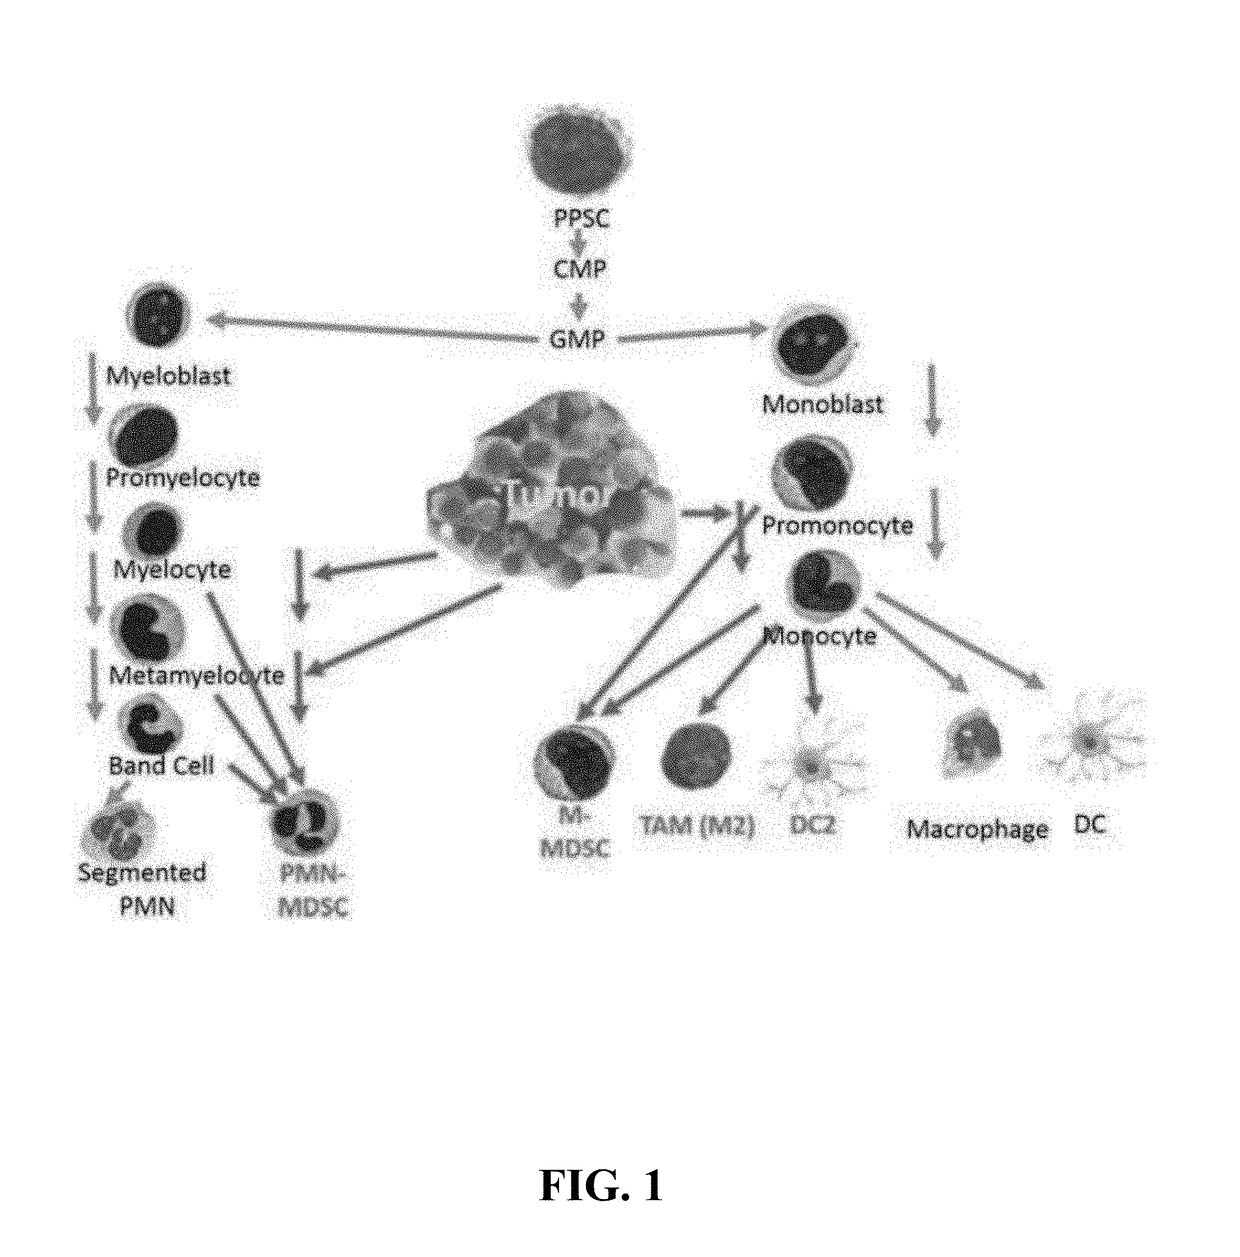 Methods for using artificial neural network analysis on flow cytometry data for cancer diagnosis